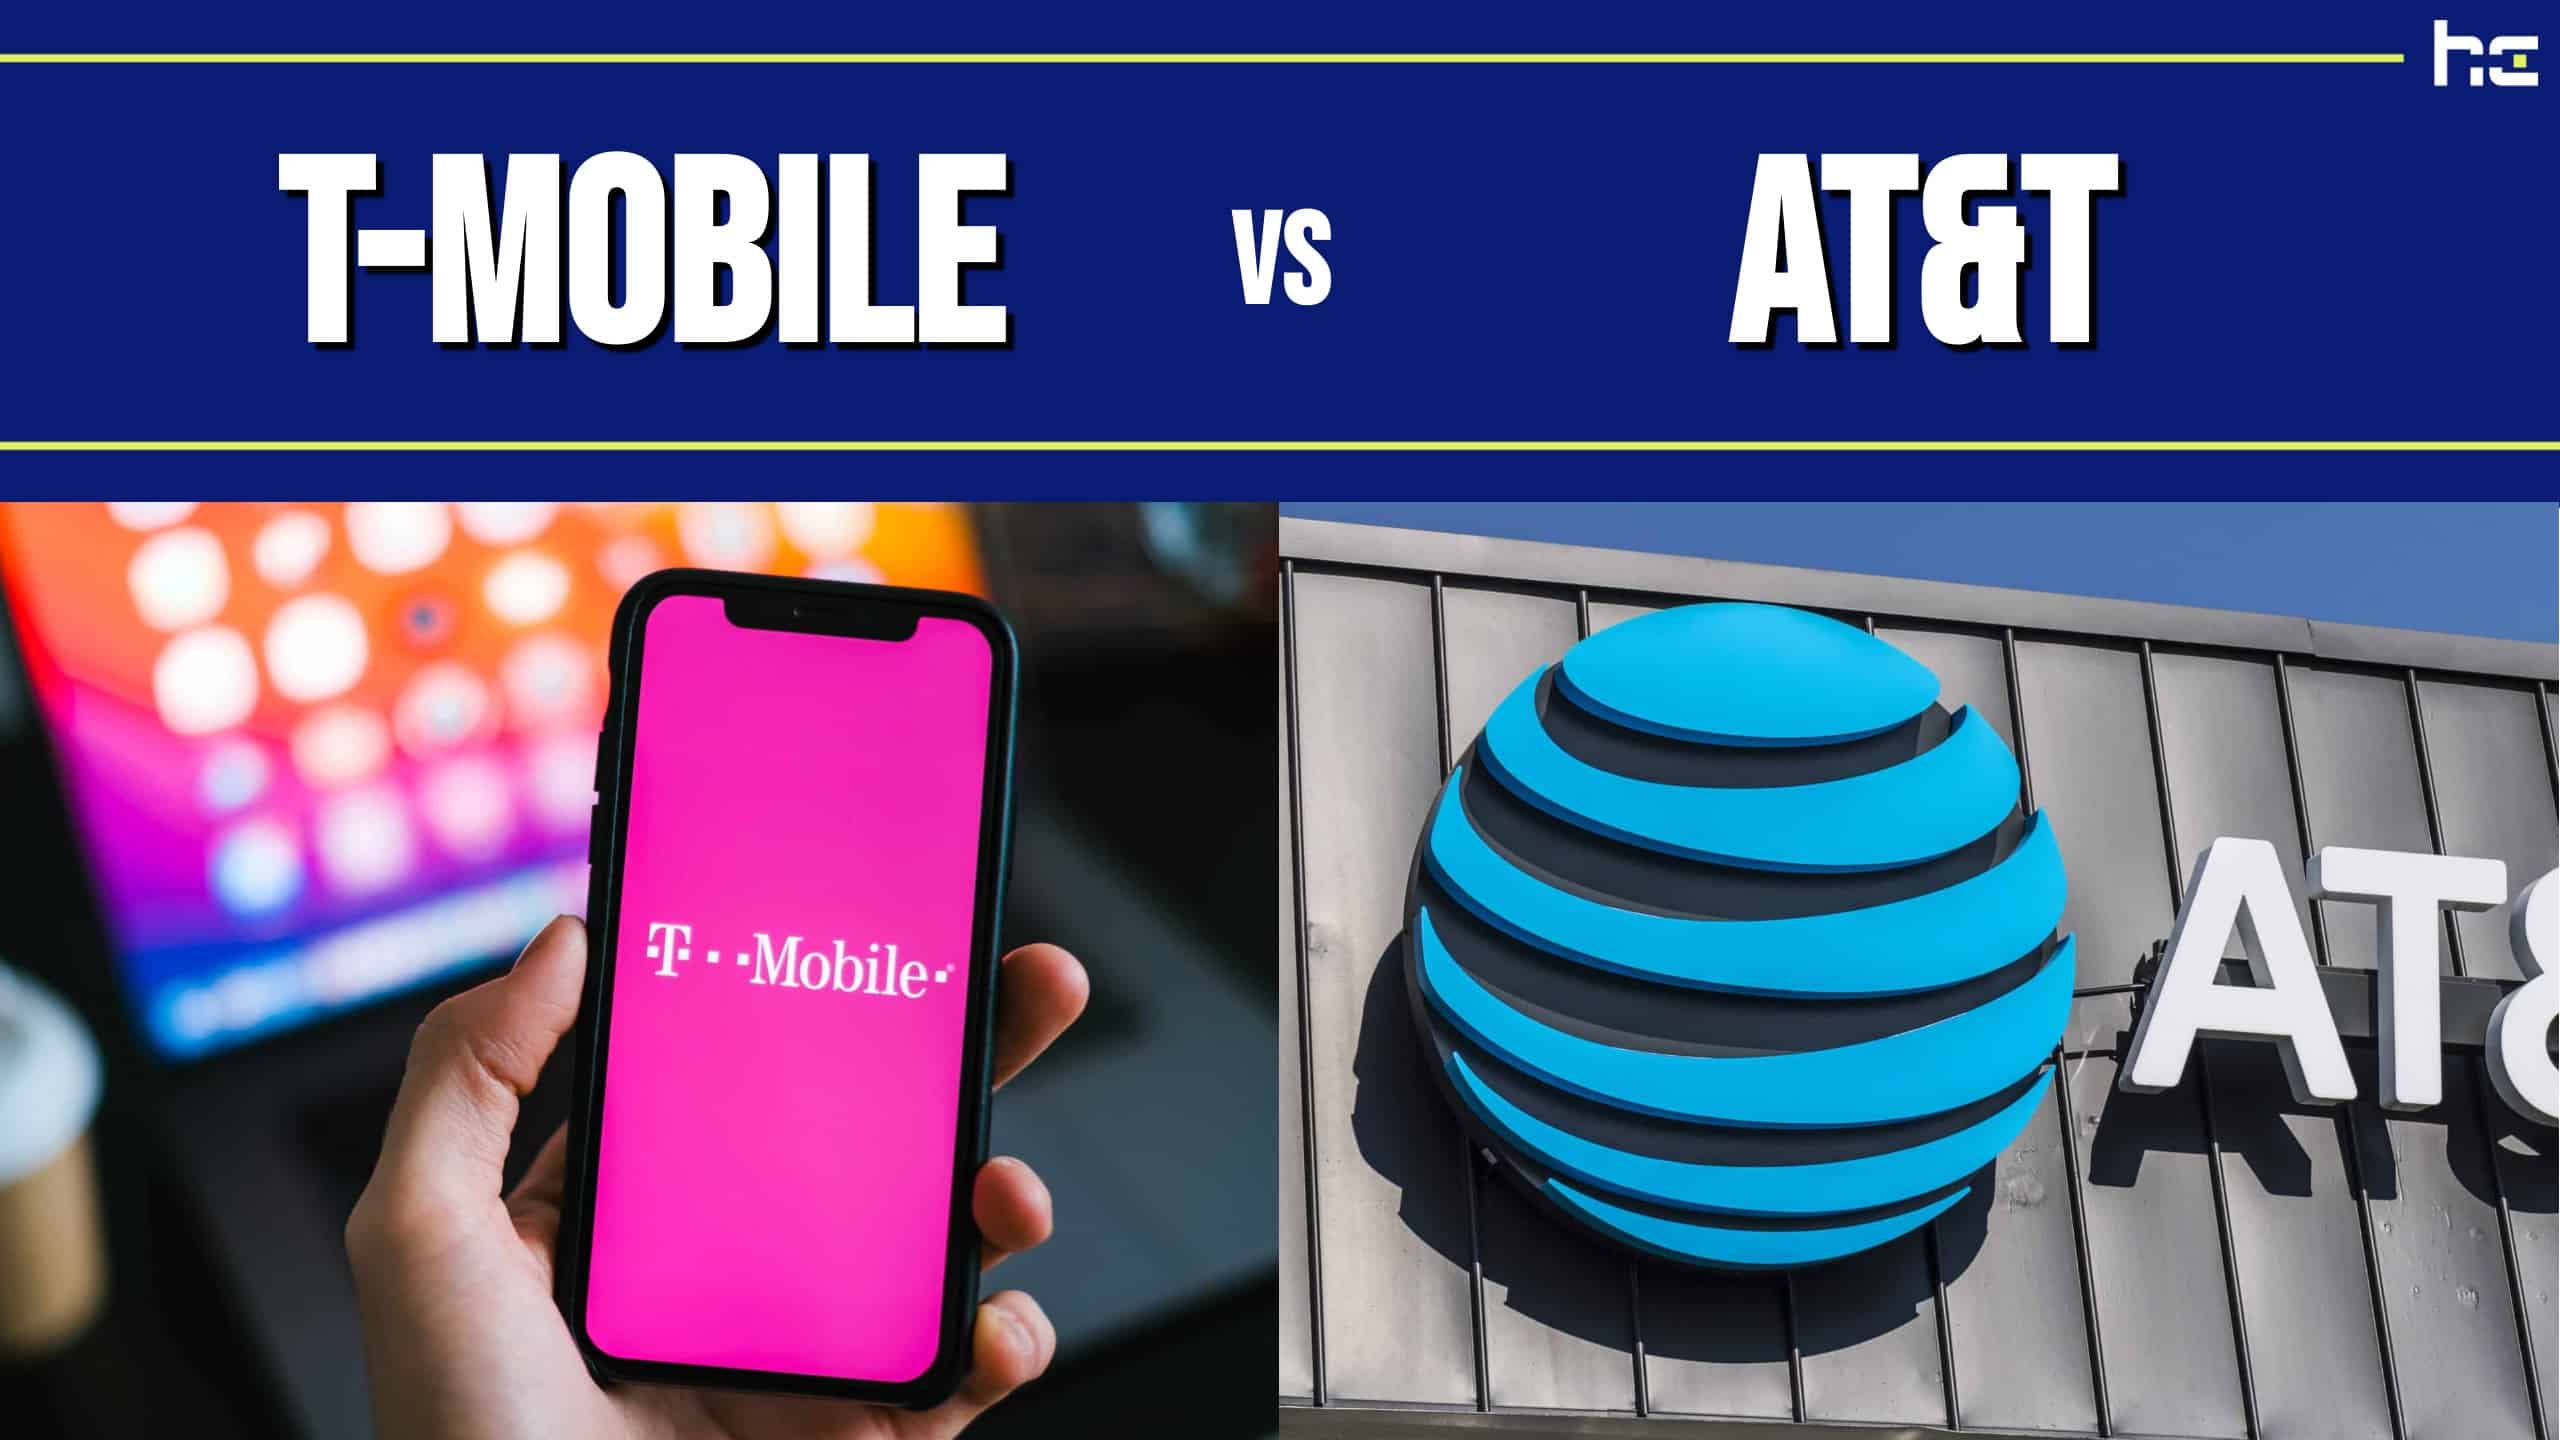 T-Mobile vs AT&T featured image